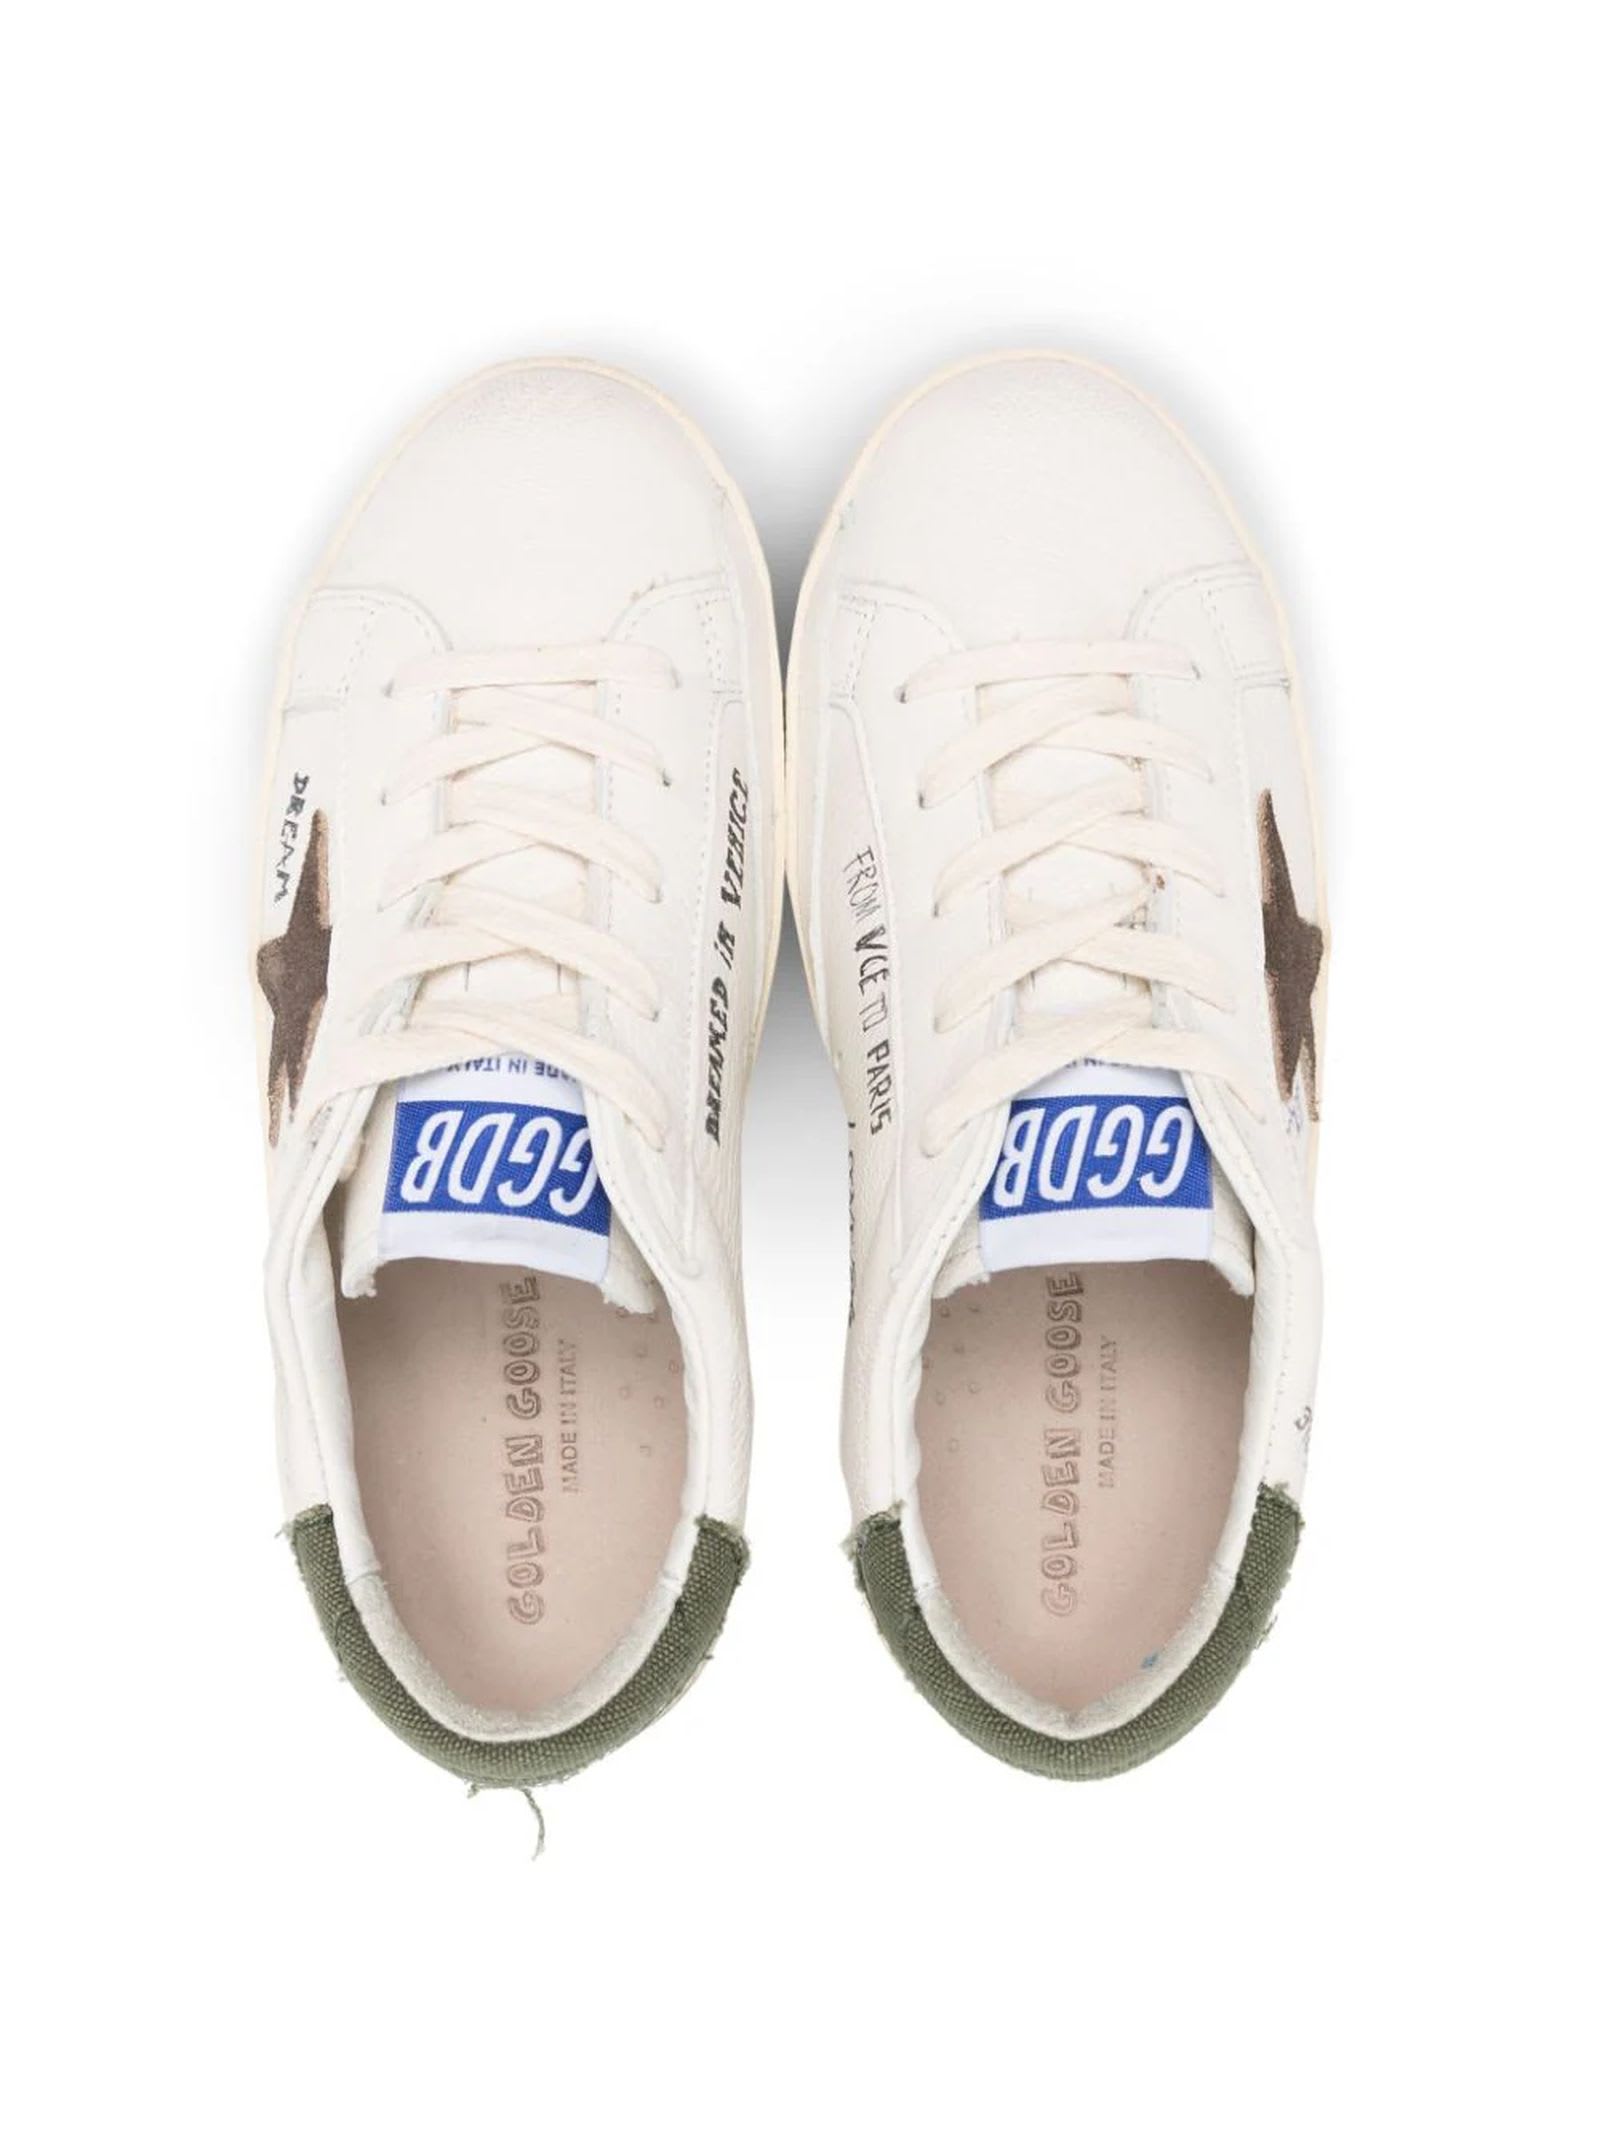 Shop Golden Goose White Leather Sneakers In White/brown/green